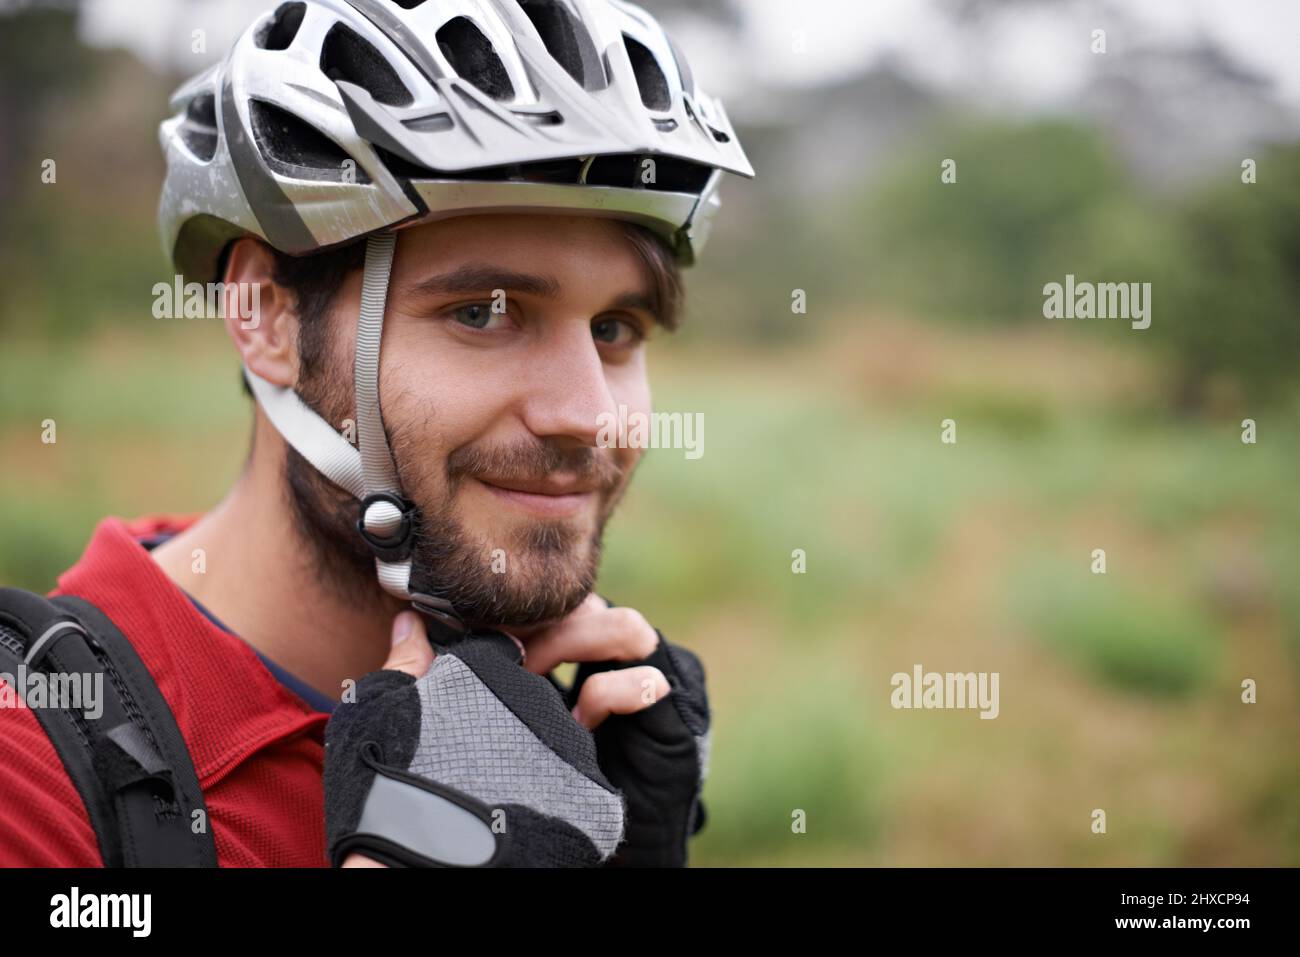 Its on tight. A young cyclist fastening his helmet. Stock Photo